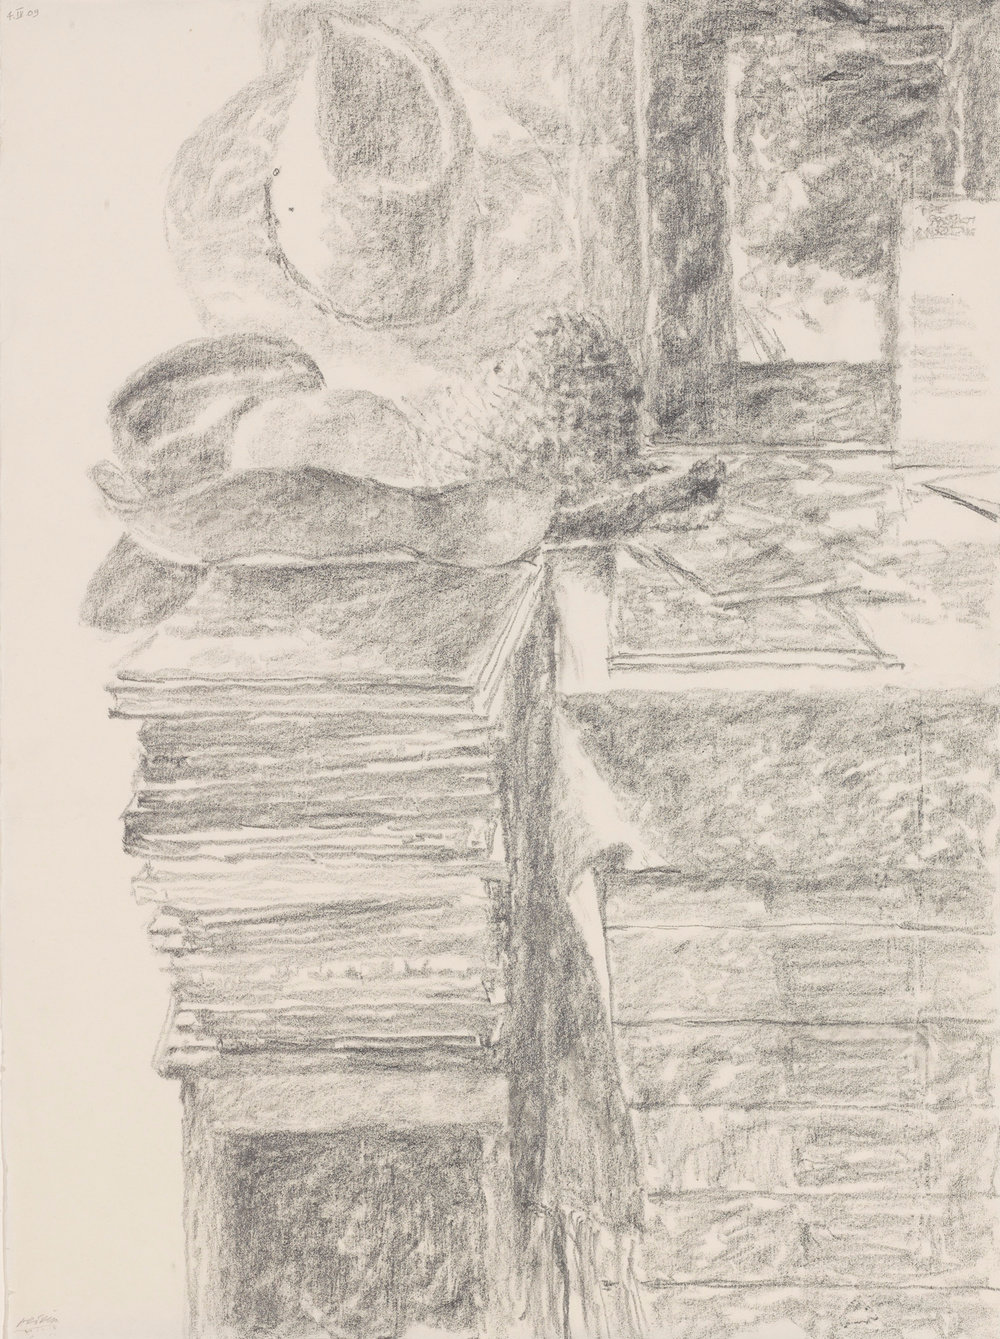 Arikha, hats placed on a pile of books, 2009, graphite on paper, 27 1 4 x 20 1 8 in